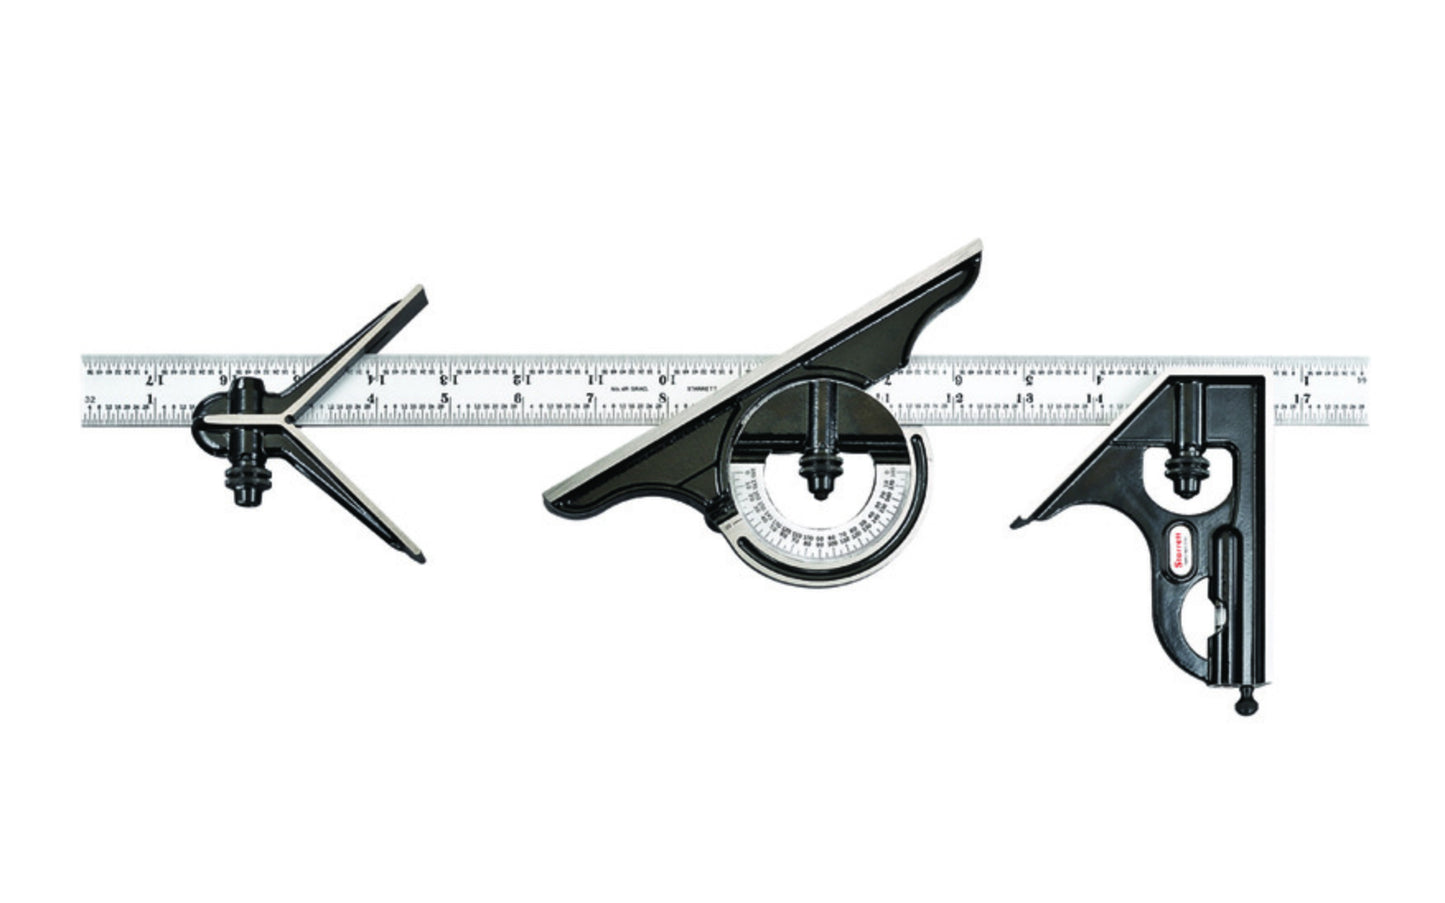 Starrett 18" Combination Set with Square, Center & Reversible Protractor Head and Blade includes a reversible lock bolt, scriber, spirit level in both square head & protractor head, direct reading double 180 Deg protractor scale, hardened steel, photo-engraved blade. The square heads and center heads are forged, hardened steel with smooth, black enamel finish. 18", 4R Grad, Satin Chrome Blade.   Made in USA.